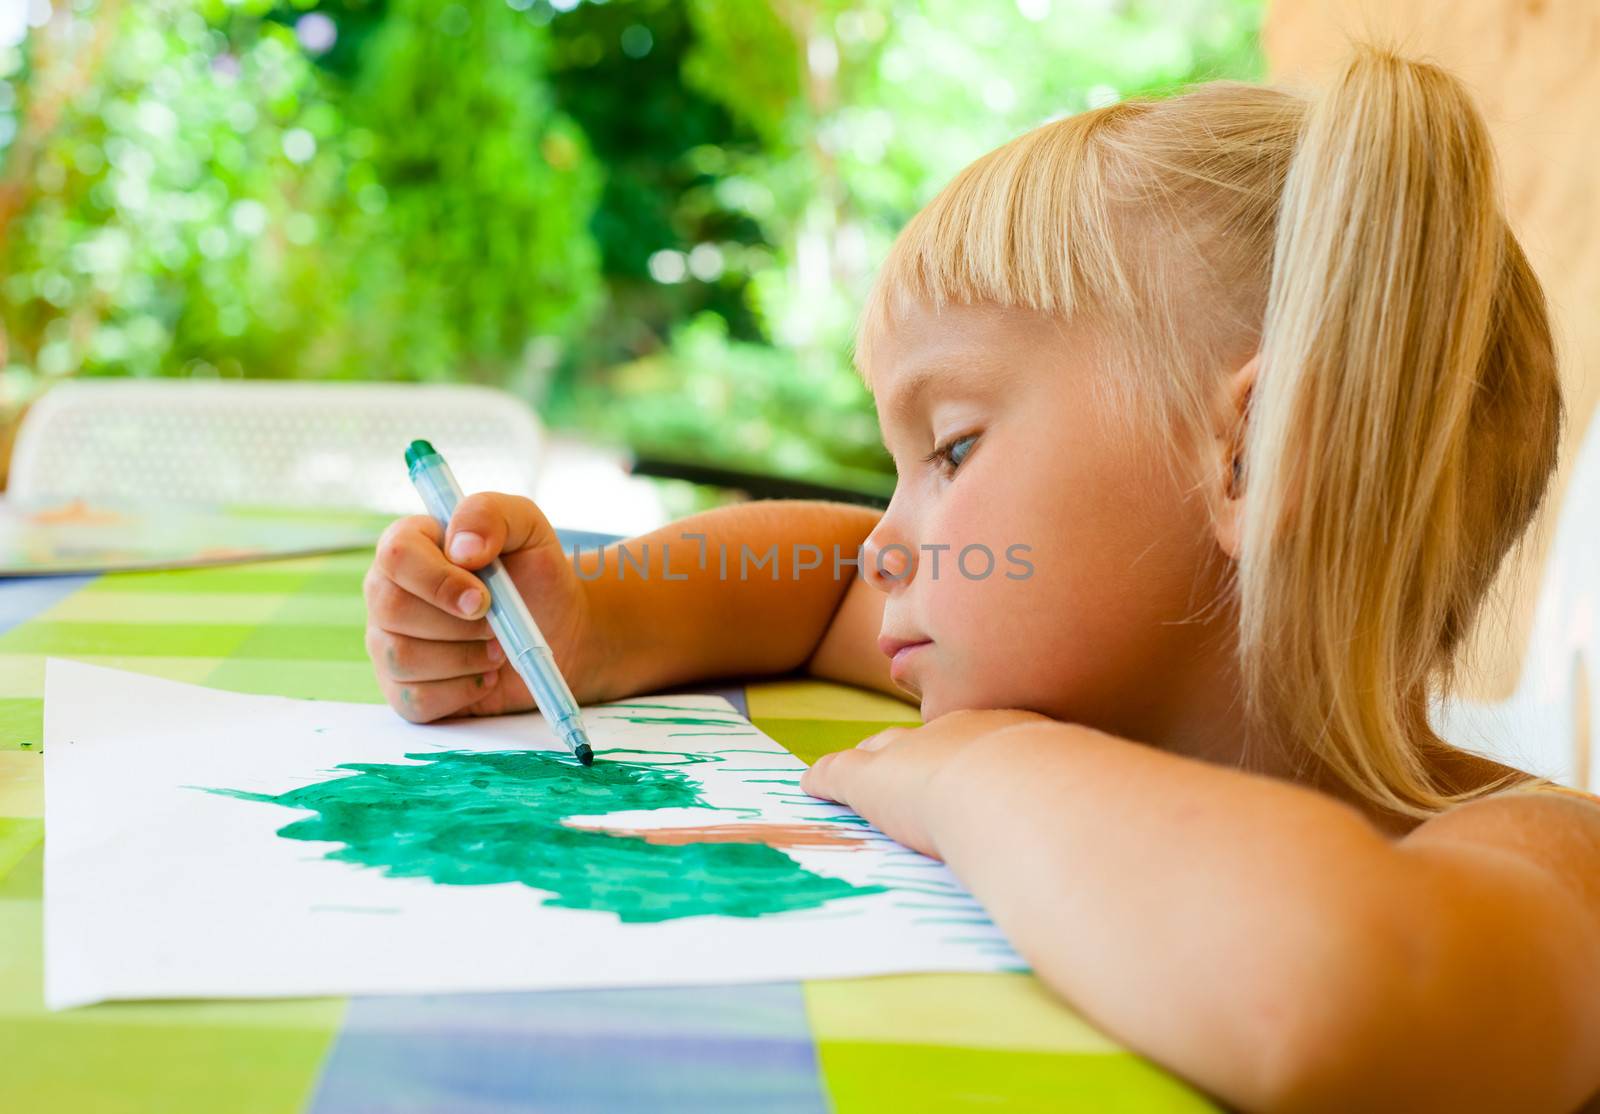 Child drawing outdoors by naumoid